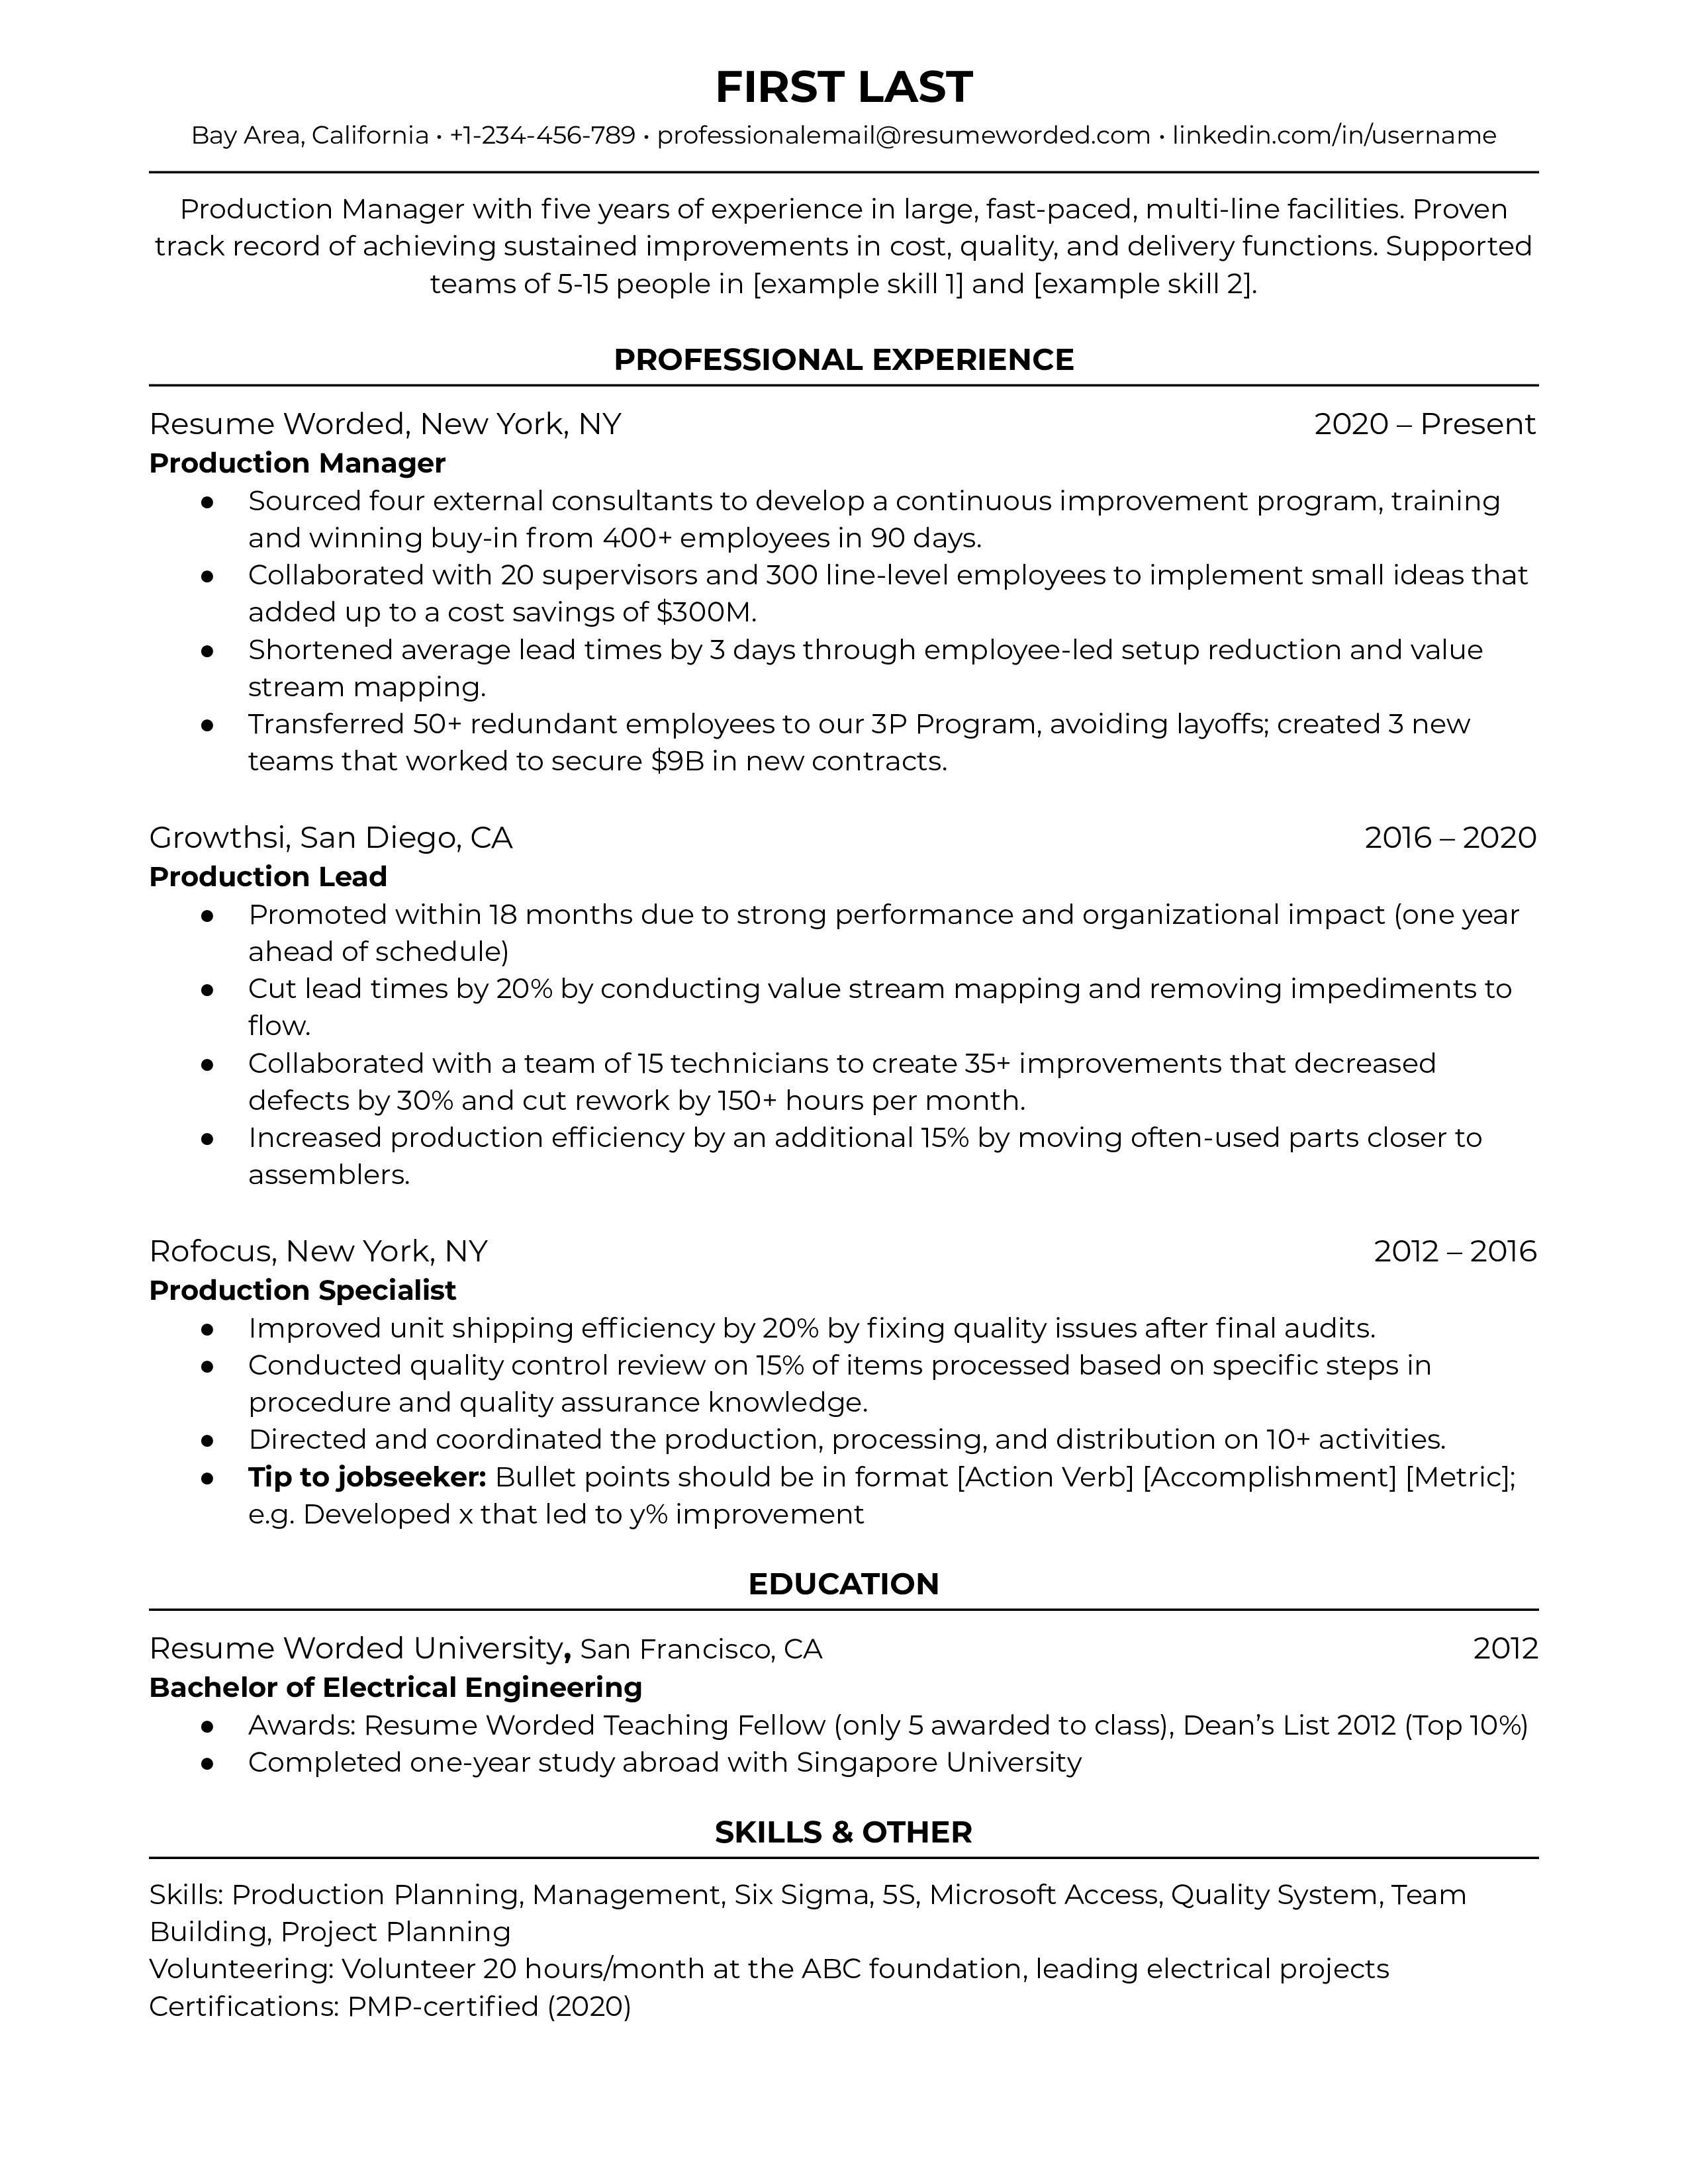 Production Manager Resume Sample